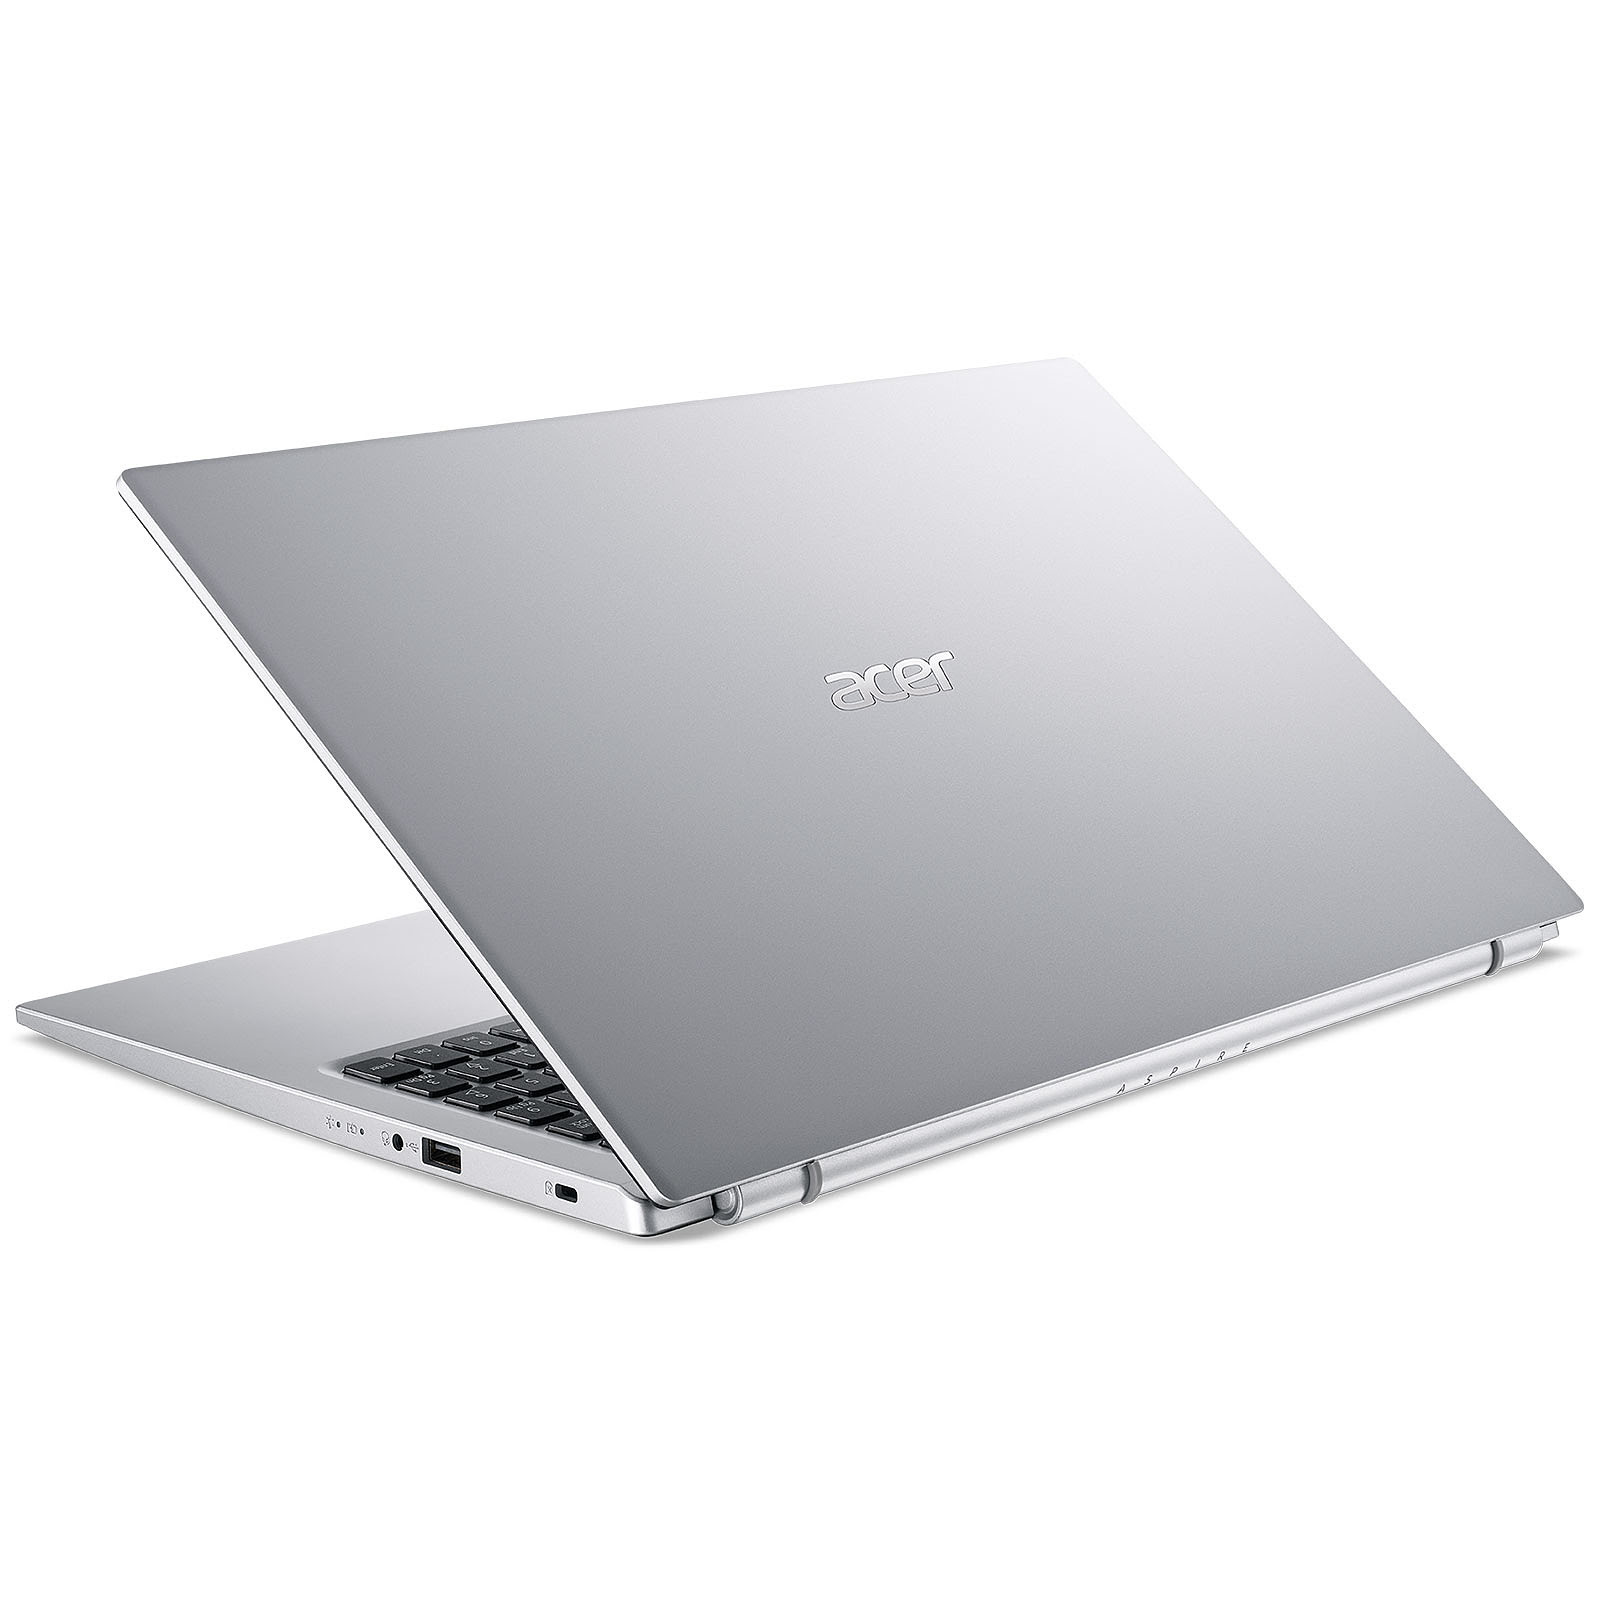 Acer NX.A6LEF.008 - PC portable Acer - grosbill-pro.com - 1